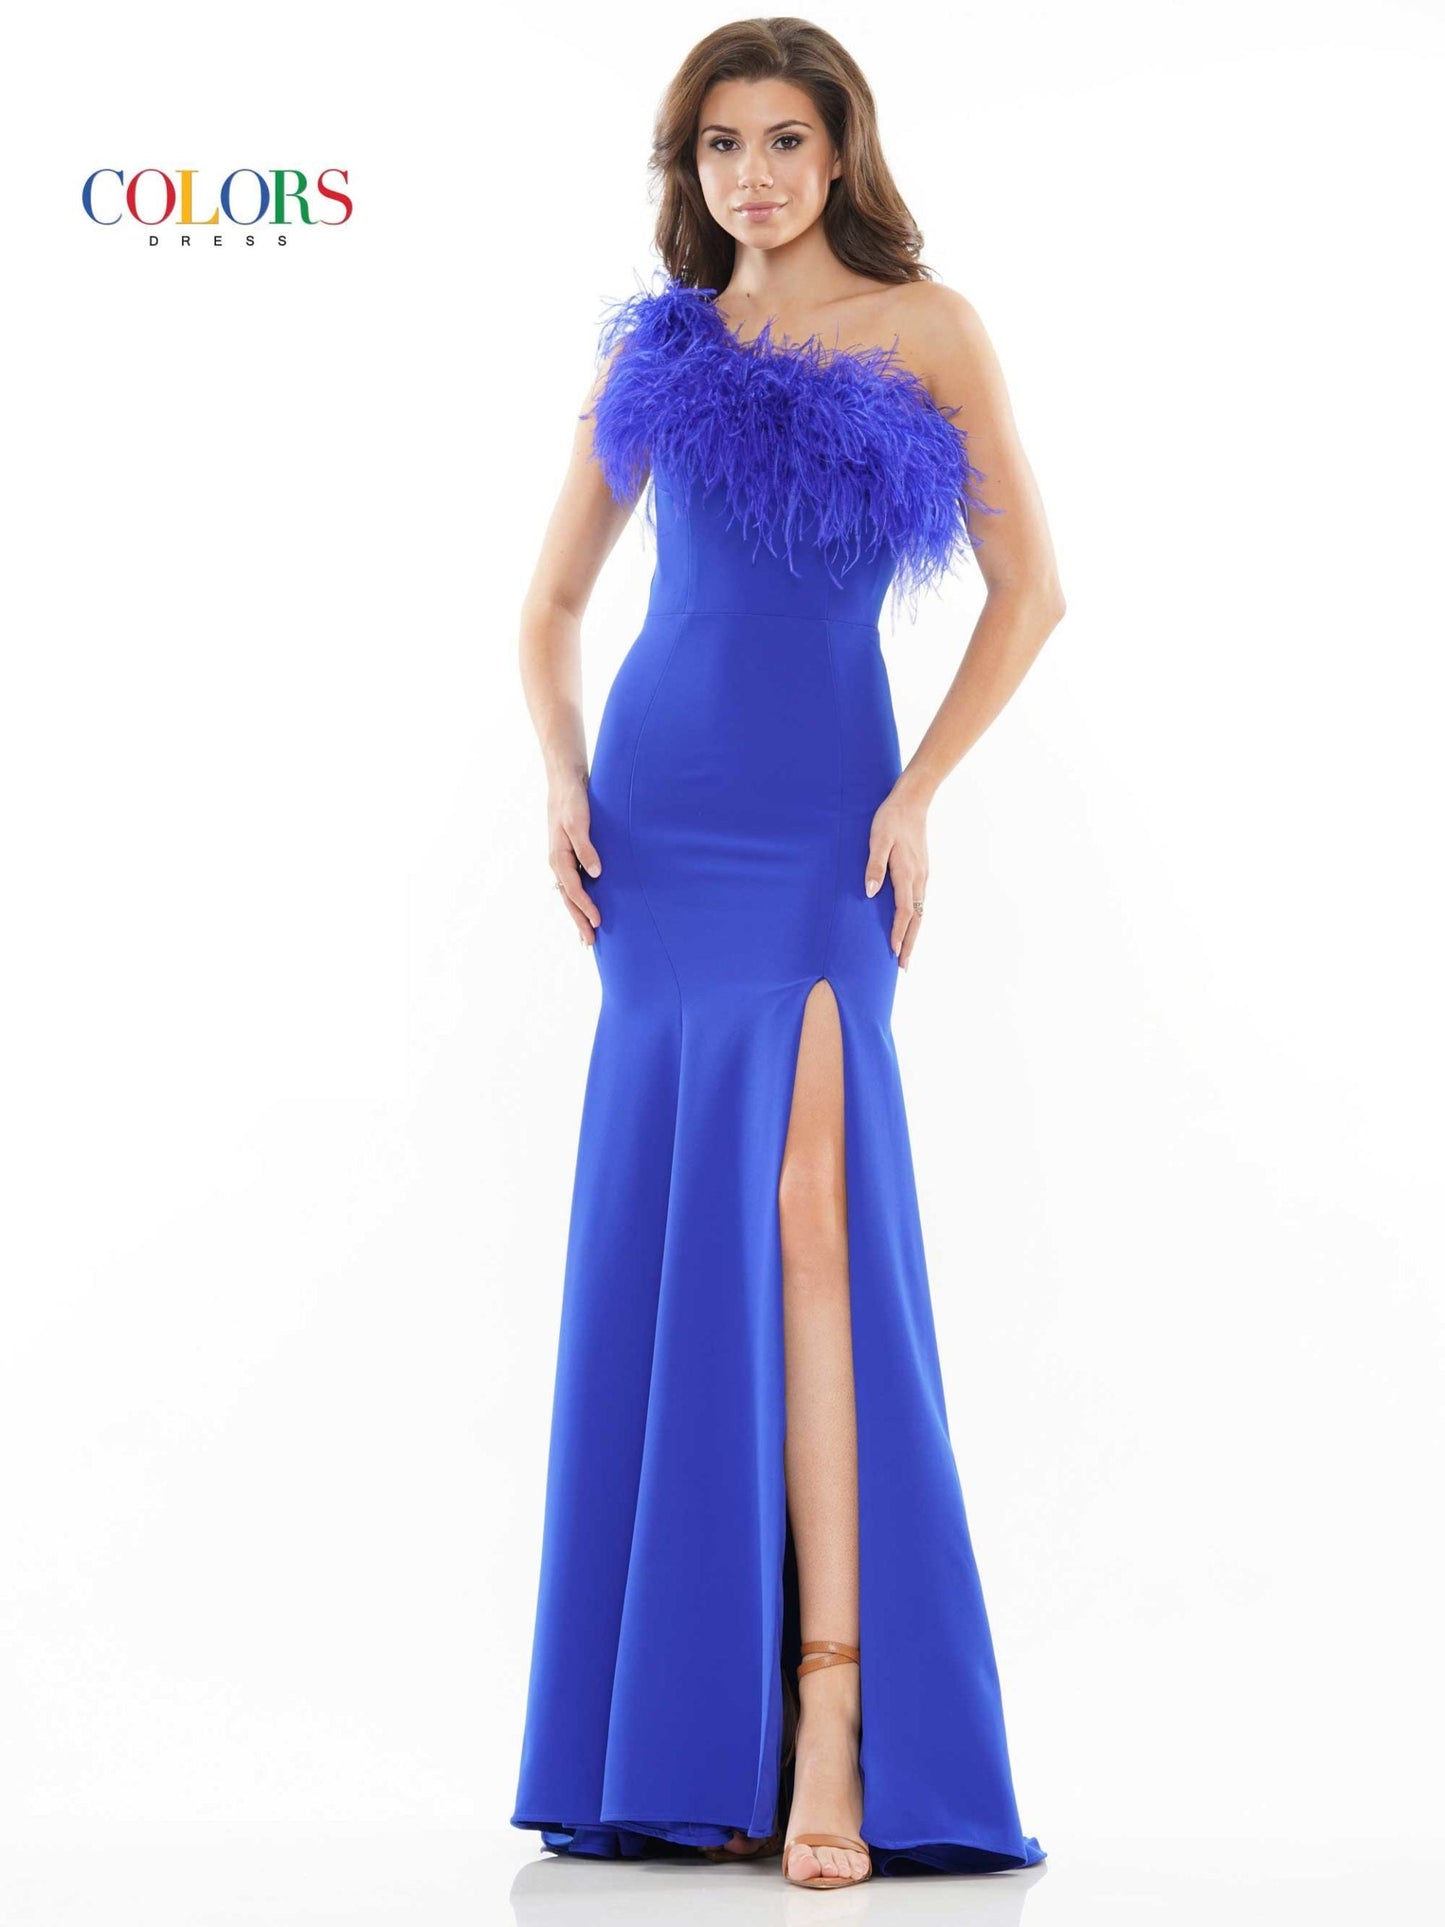 Colors Dress 2405 Fitted One Shoulder Feather Embellished Prom Dress Slit Gown 47″ one shoulder fit and flare crepe dress with ostrich feathers along the neckline, front slit  Available Sizes: 0-22  Available Colors: Black, Light Blue, Off White, Royal, Hot Pink